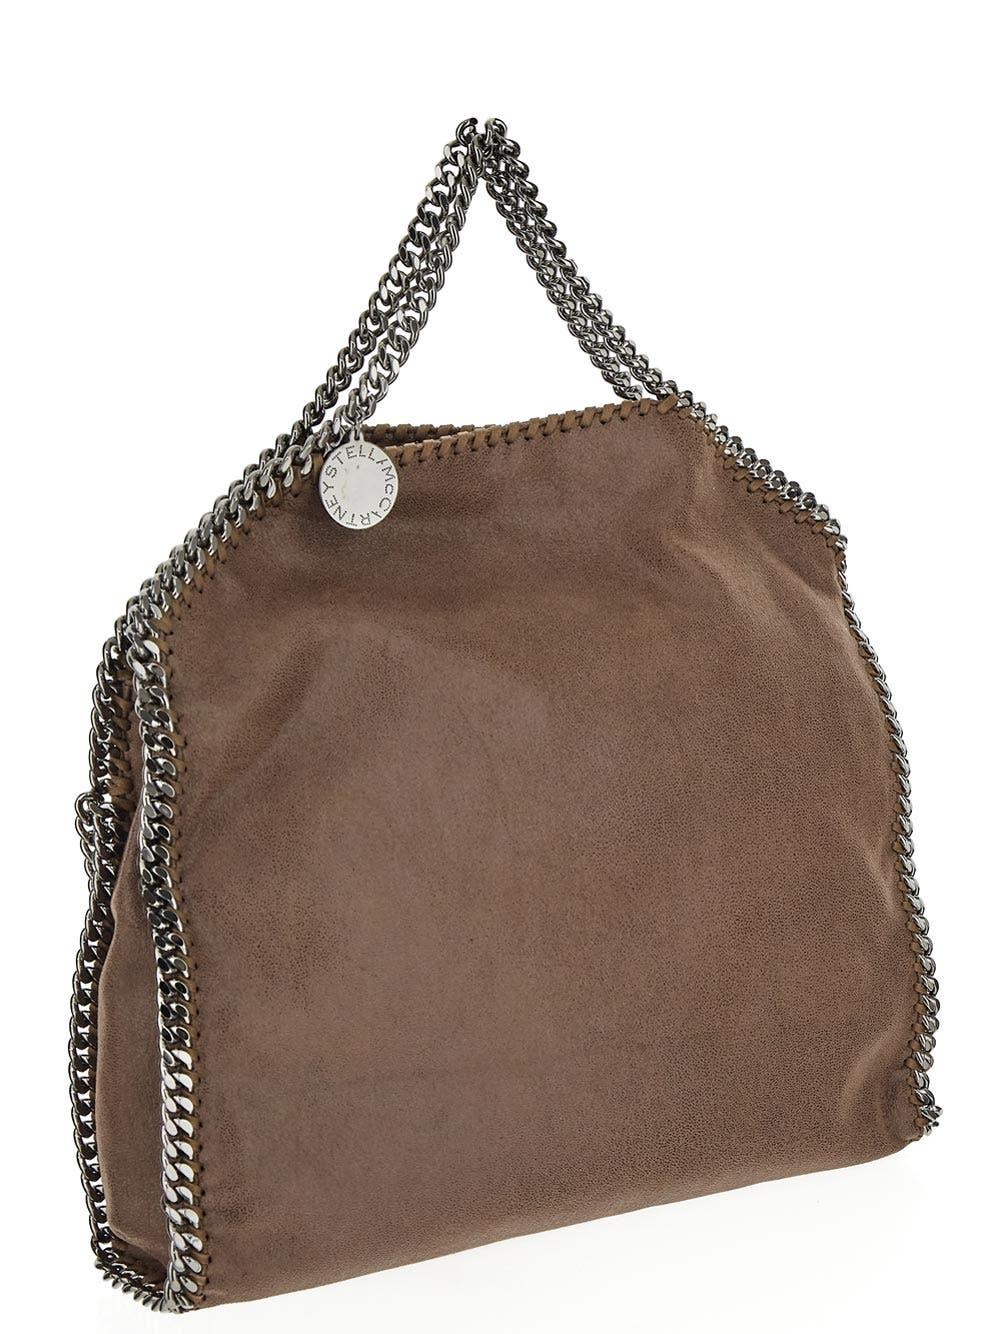 Stella McCartney Falabella Fold-over Tote Bag in Brown | Lyst